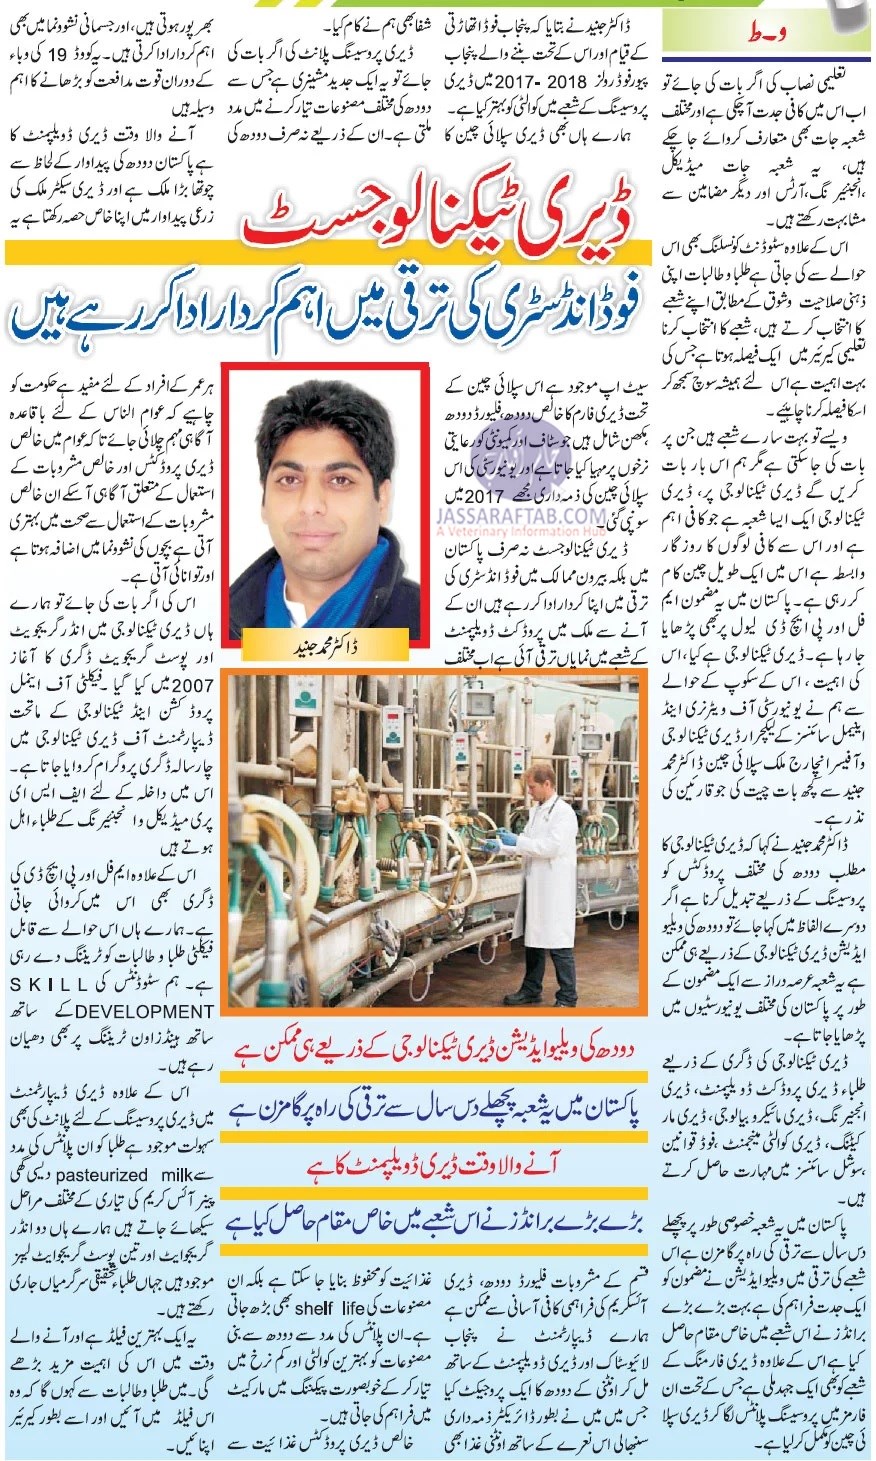 Importance and role of dairy technology and Dairy technologists